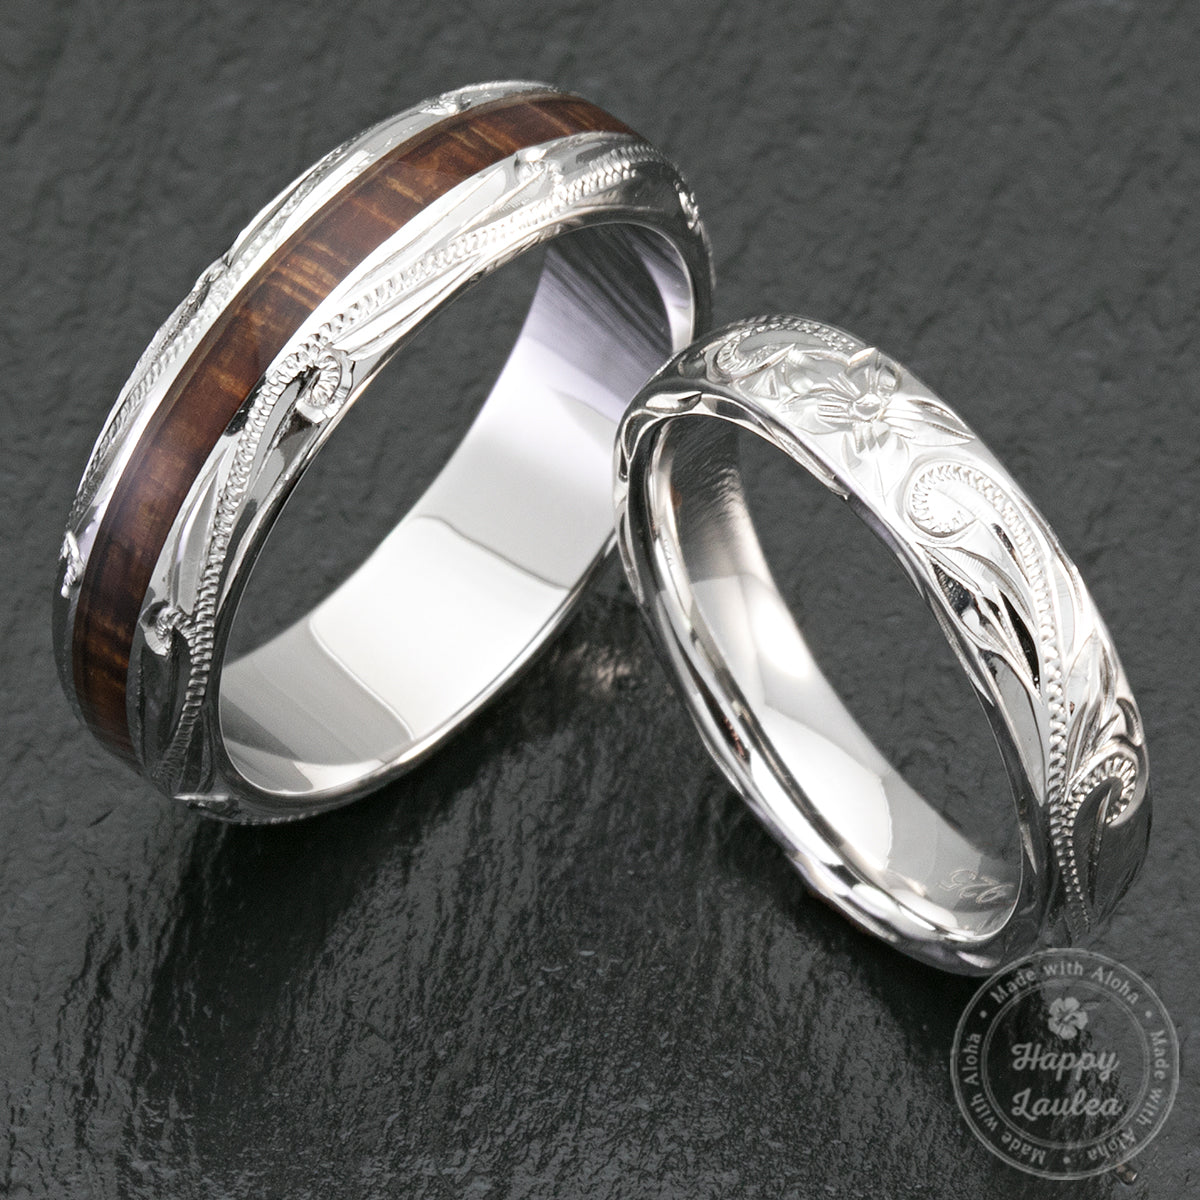 Pair of 4&6mm Sterling Silver Hawaiian Jewelry Couple/Wedding Rings wi